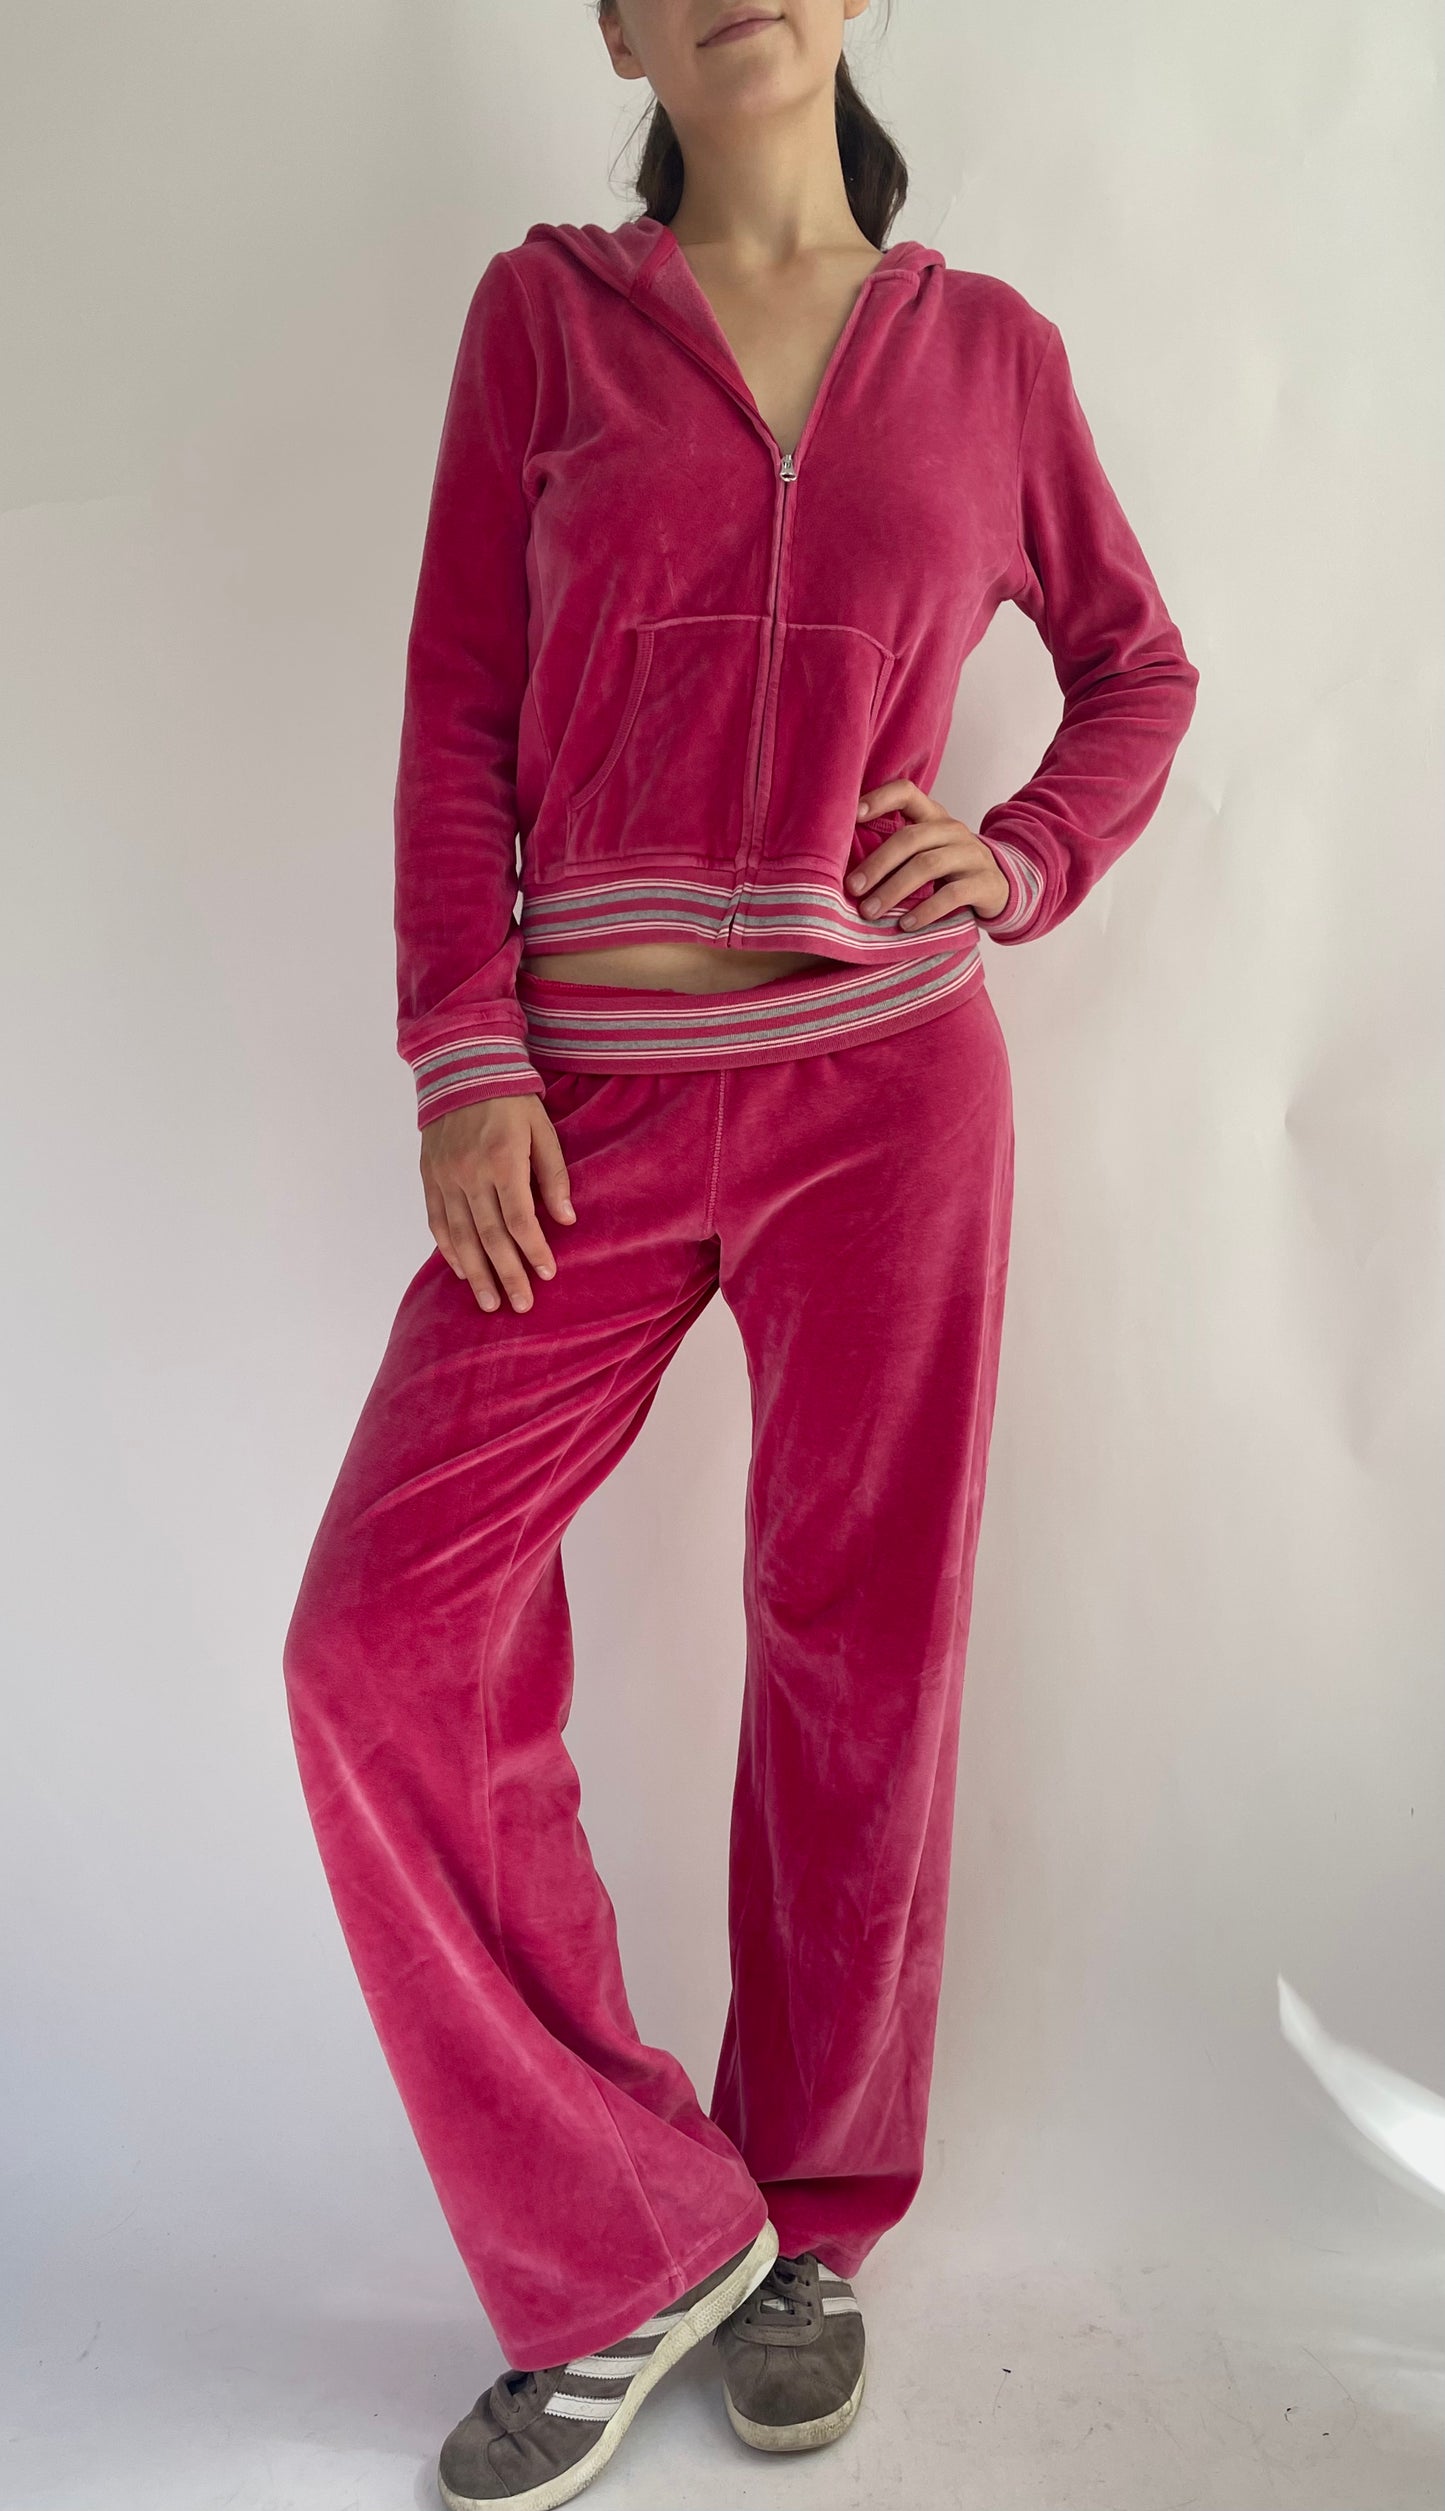 Early 2000s pink velour set by GAP